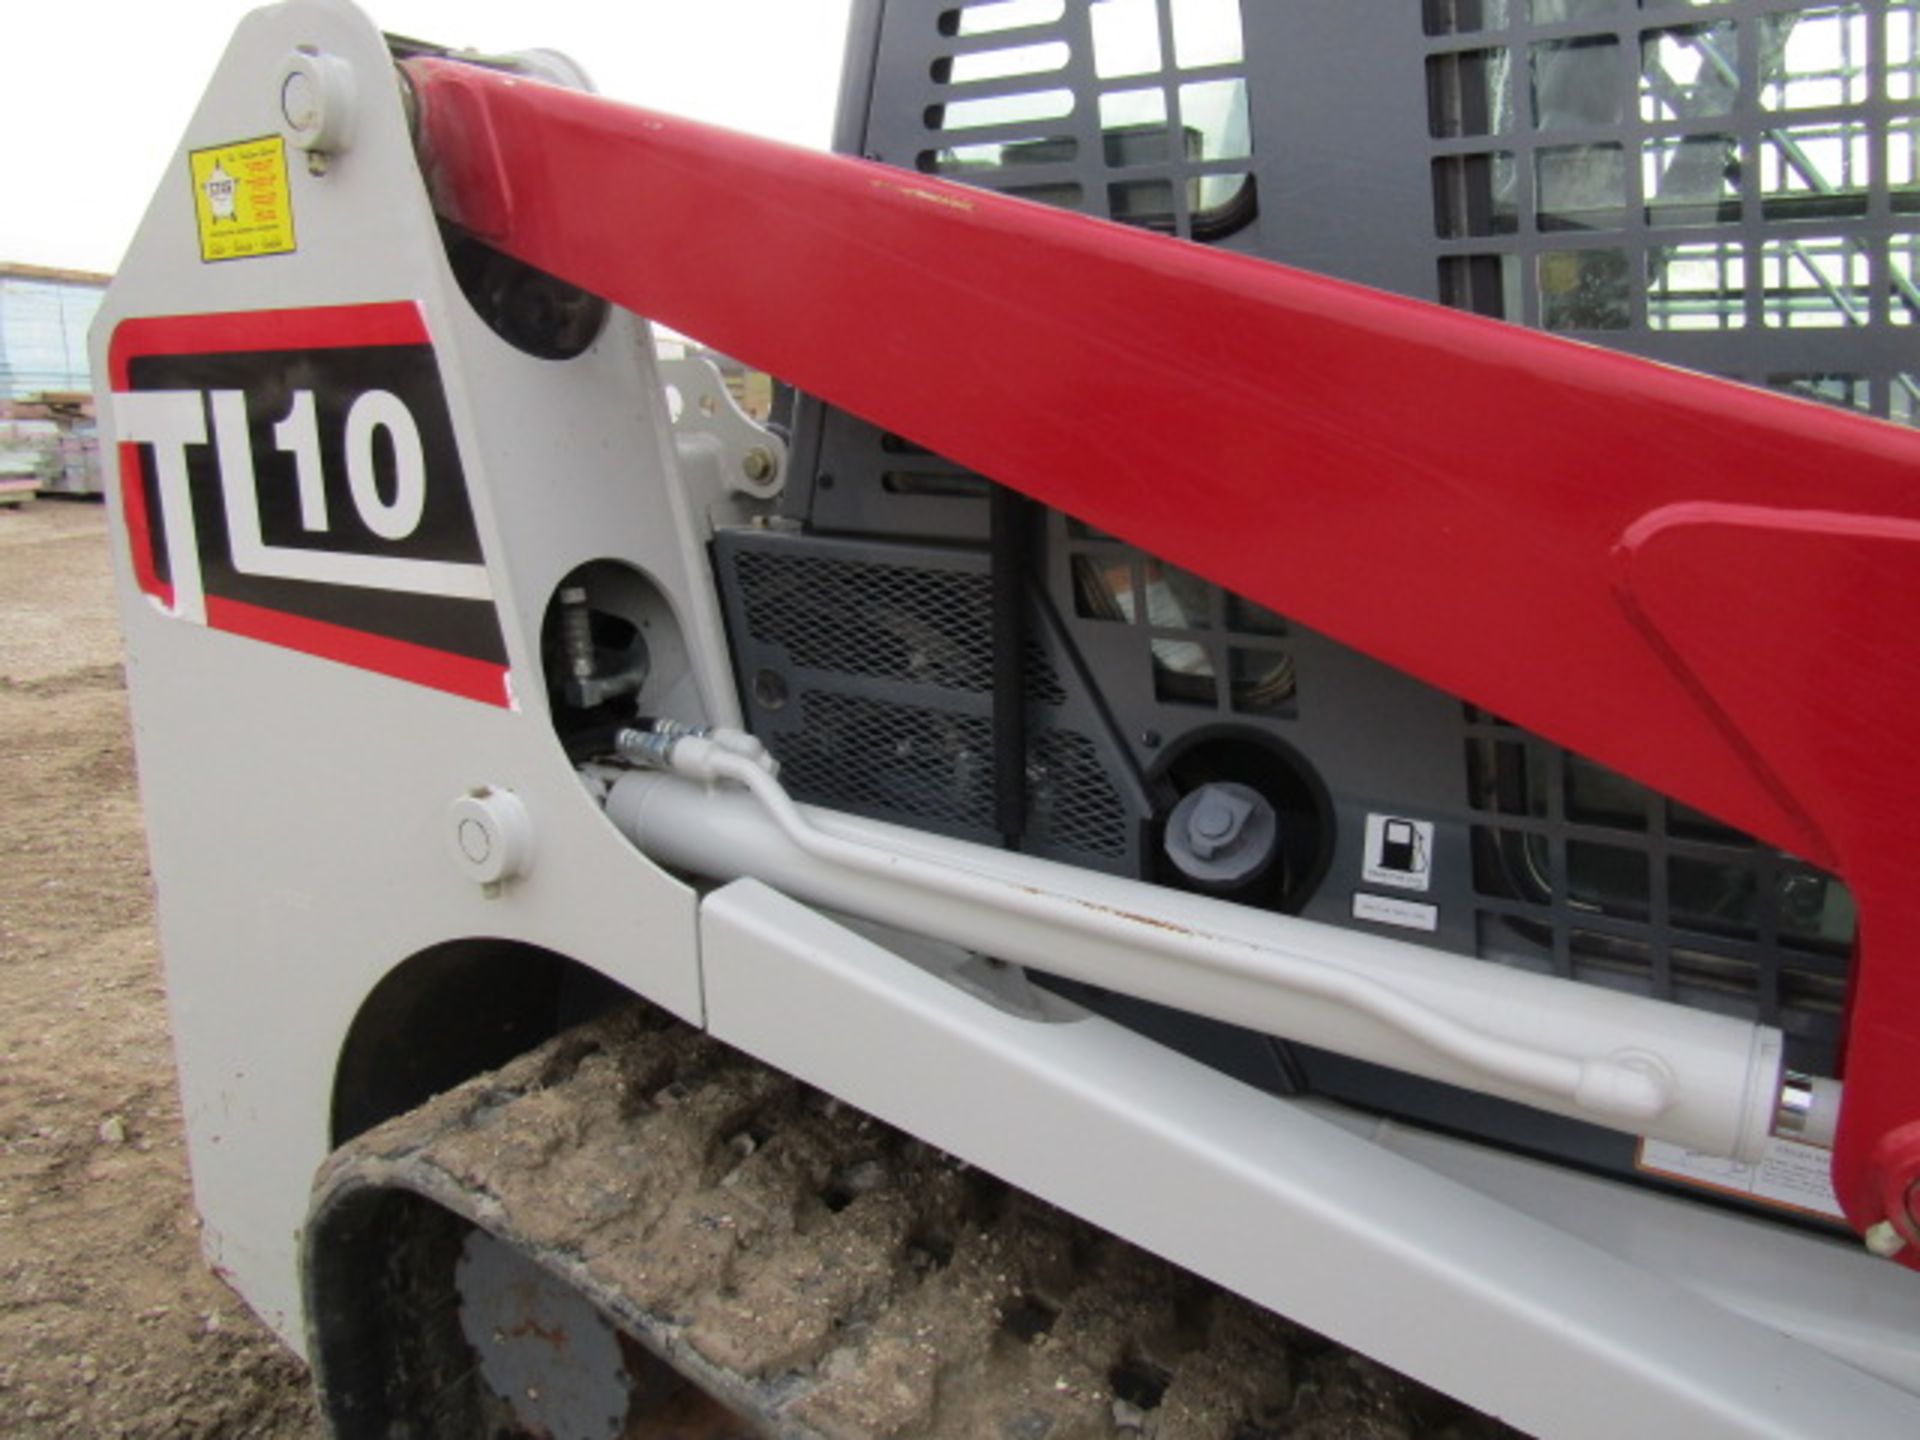 2016 Takeuchi TL10 Uniloader, Serial # 201003309, 448 Hours, with 6'4" Bucket, Bradco Model 10702 - Image 29 of 29